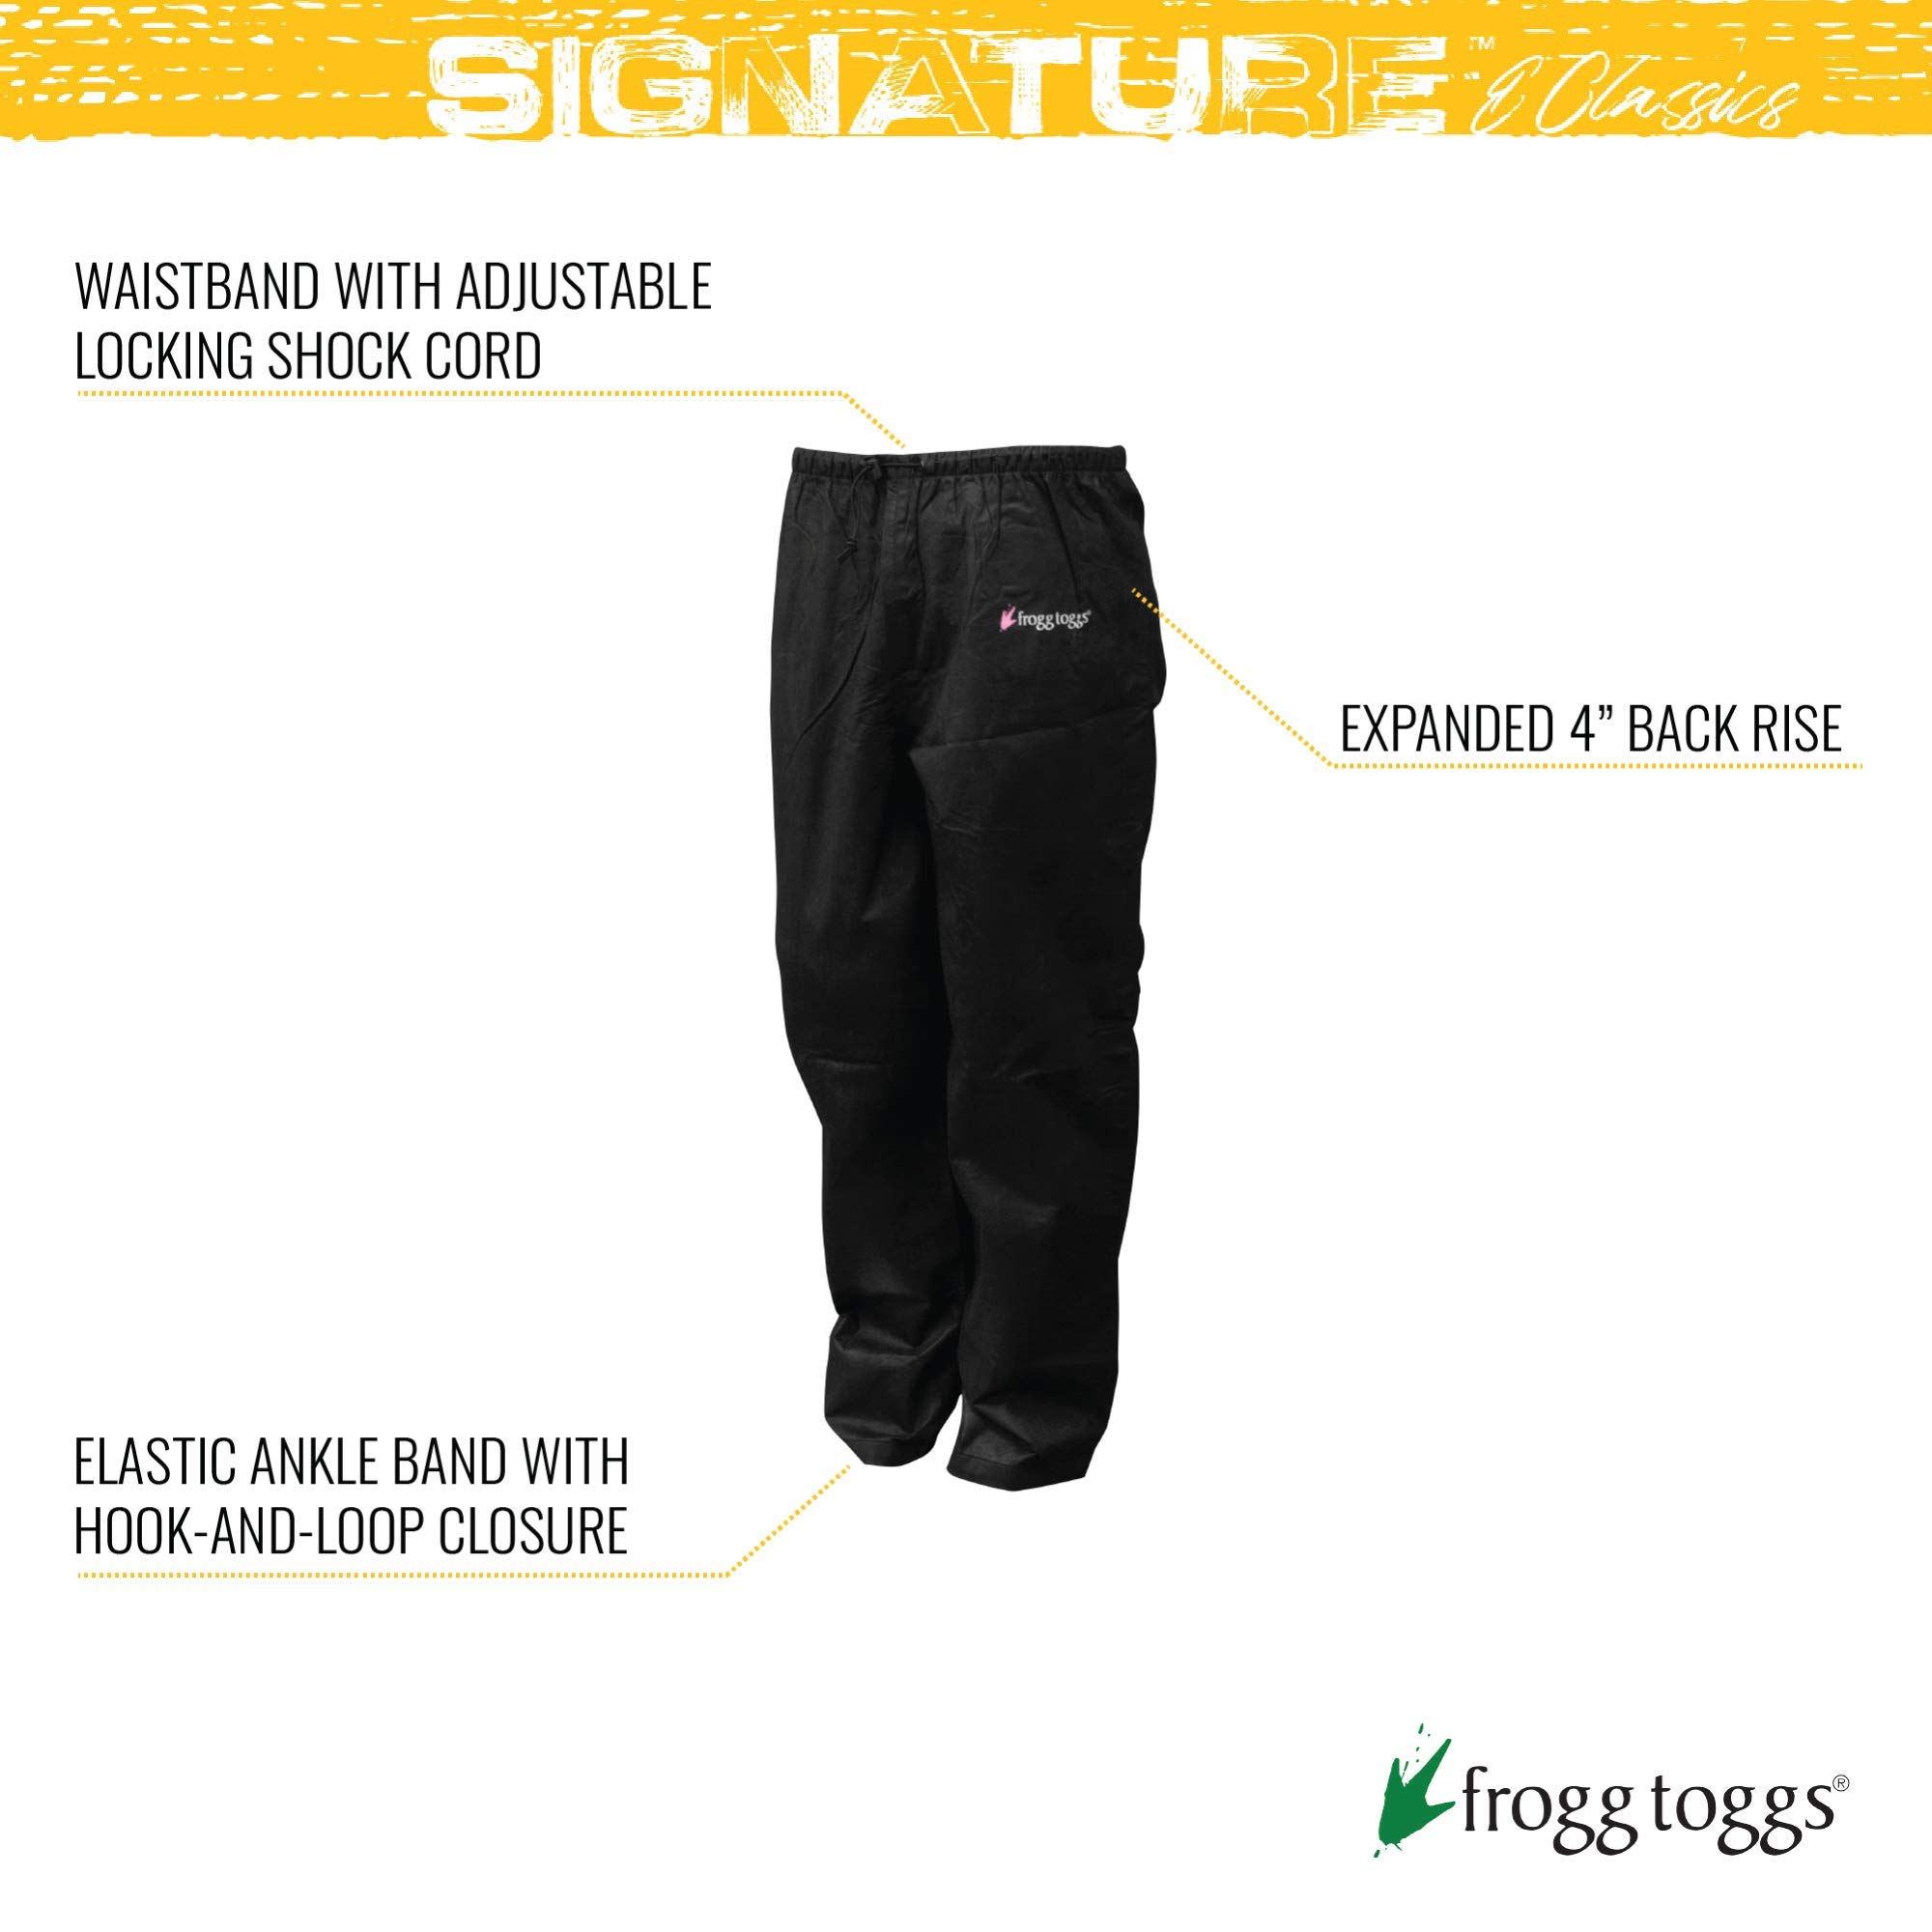 FROGG TOGGS Women's Classic Pro Action Waterproof Breathable Rain Pant